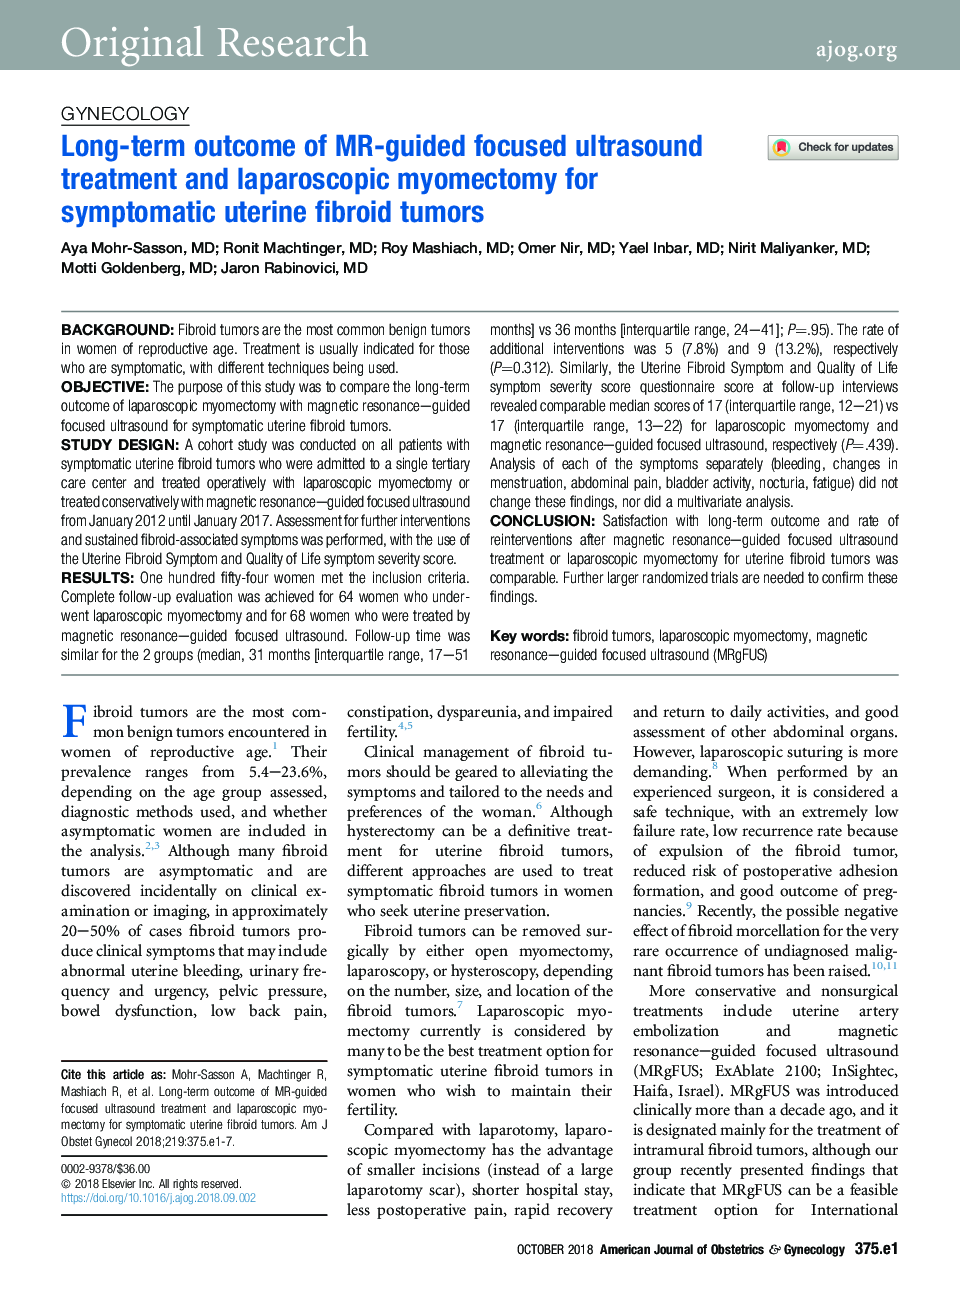 Long-term outcome of MR-guided focused ultrasound treatment and laparoscopic myomectomy for symptomatic uterine fibroid tumors